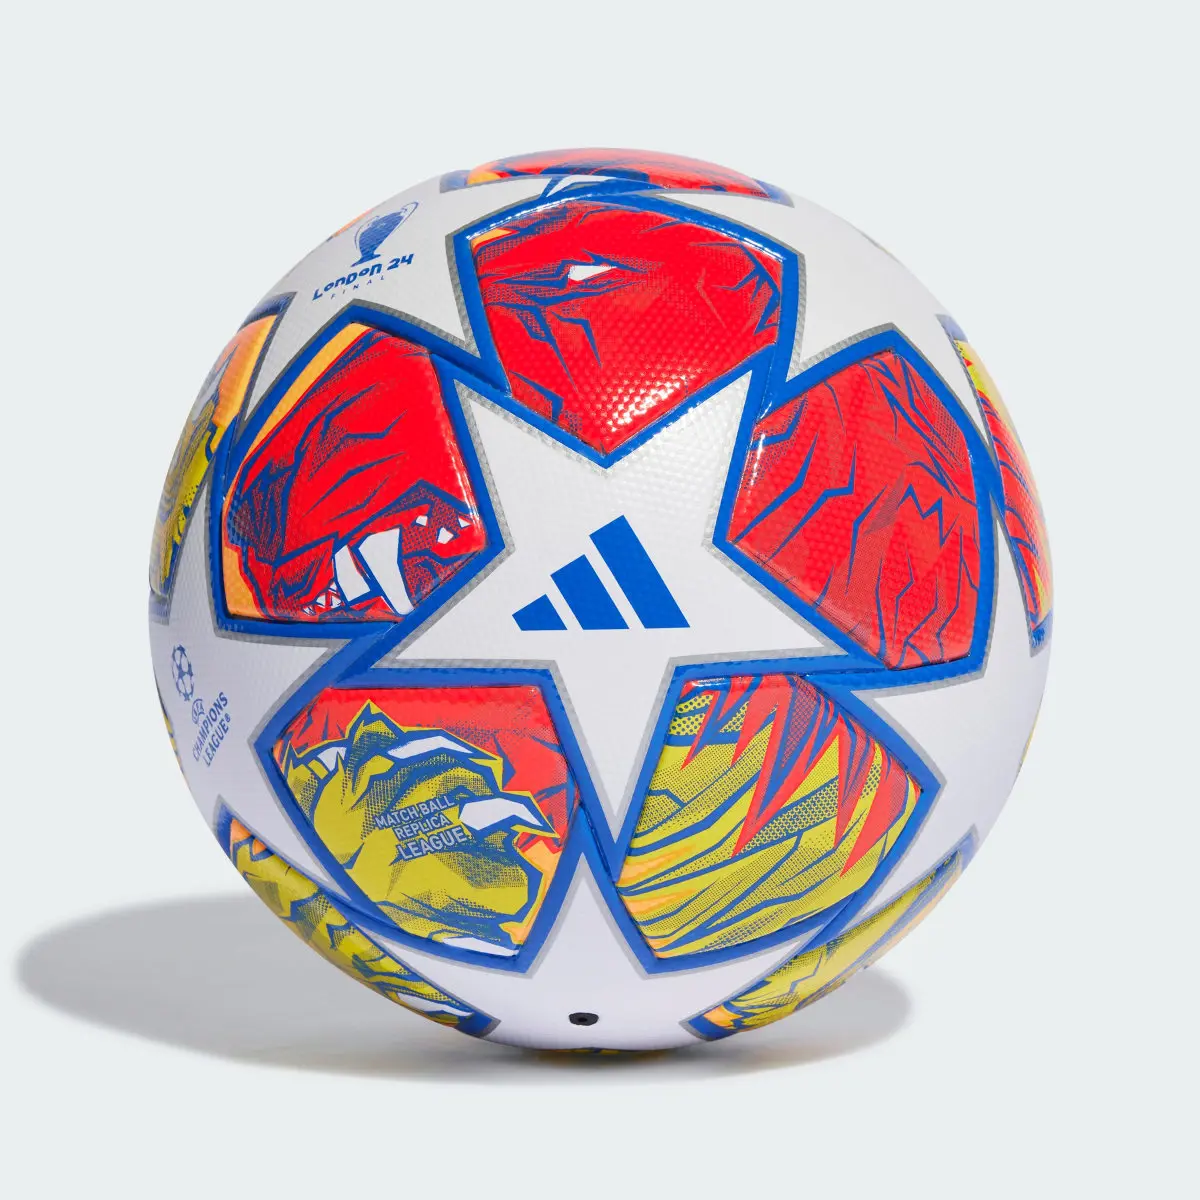 Adidas UCL League 23/24 Knock-out Ball. 2